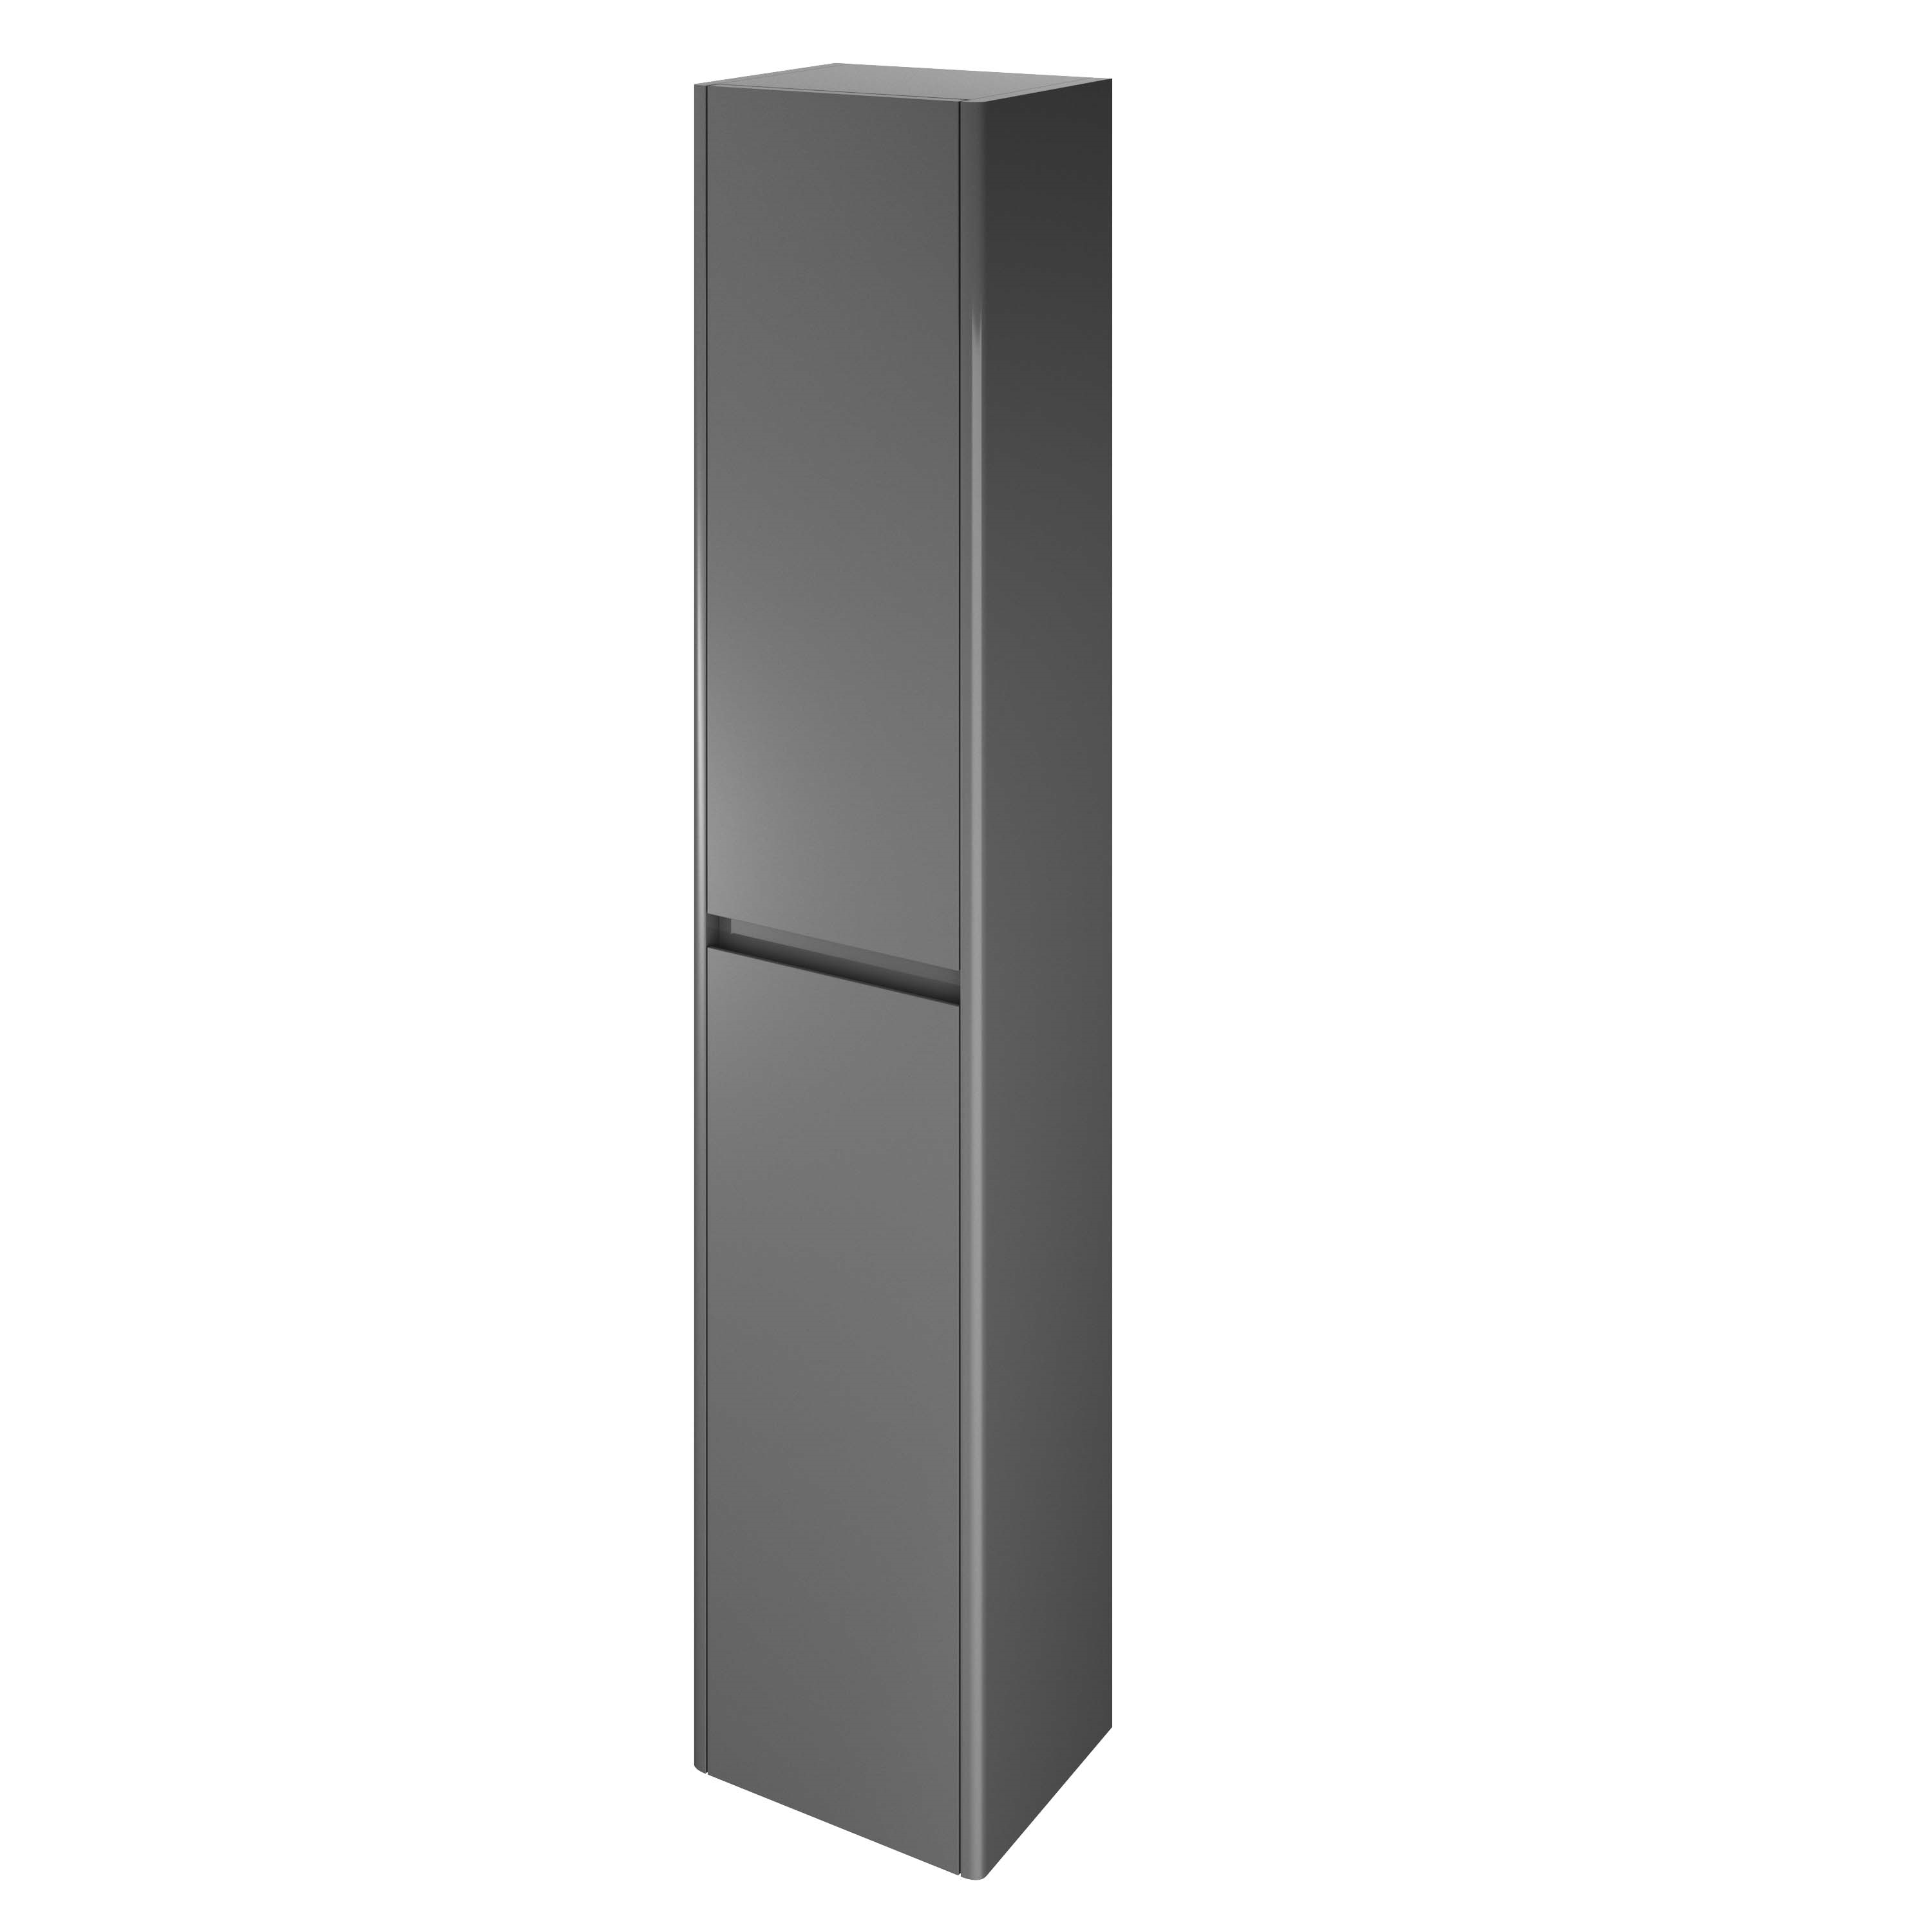 The White Space AMFTBAG Americana 140cm Tall Cabinet - Anthracite Grey